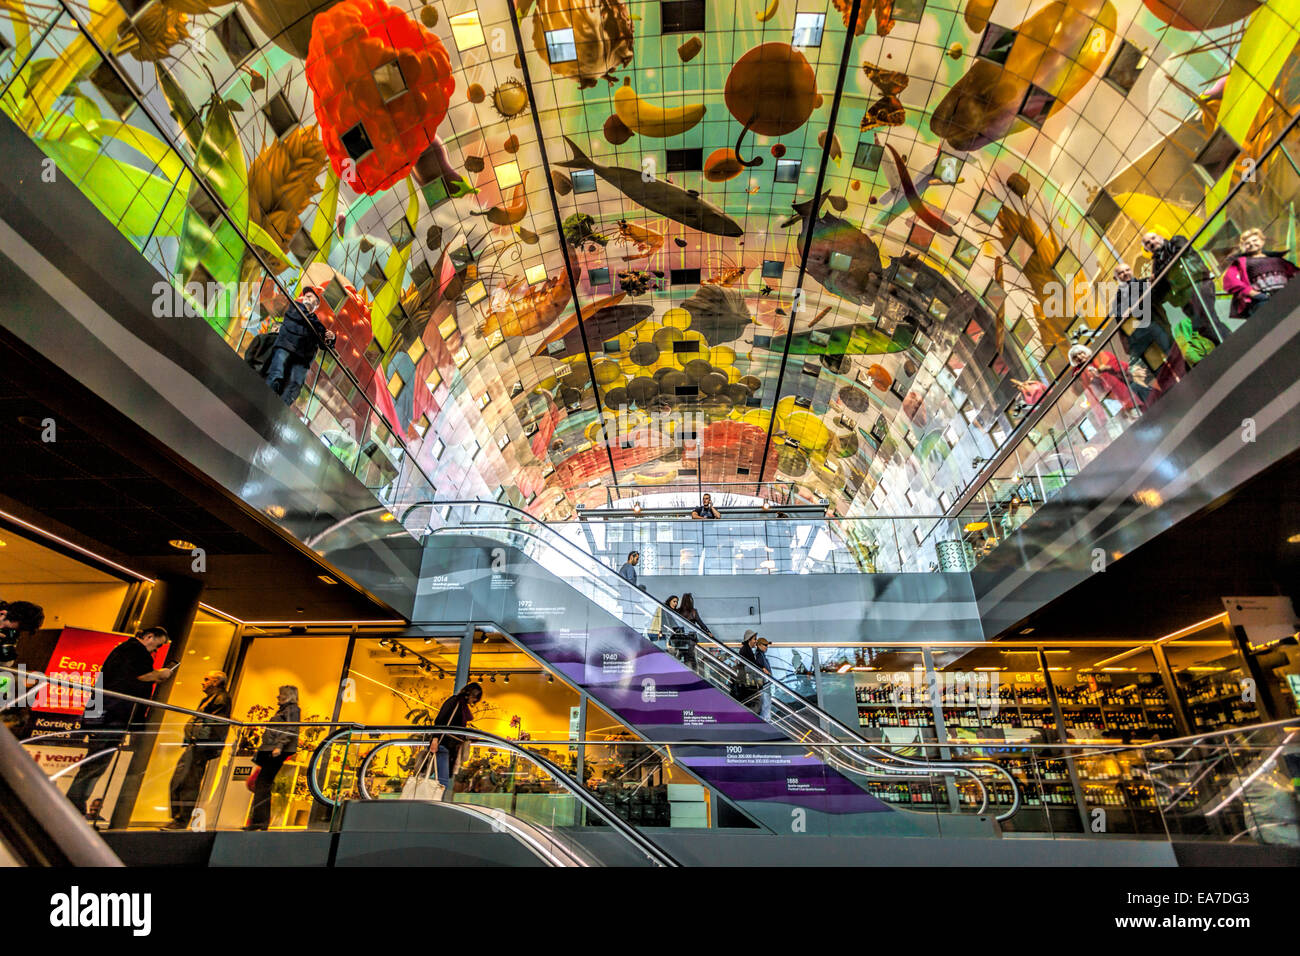 Interior view of the new Market hall or in Dutch Markthal Rotterdam in Rotterdam, South Holland, The Netherlands. Stock Photo